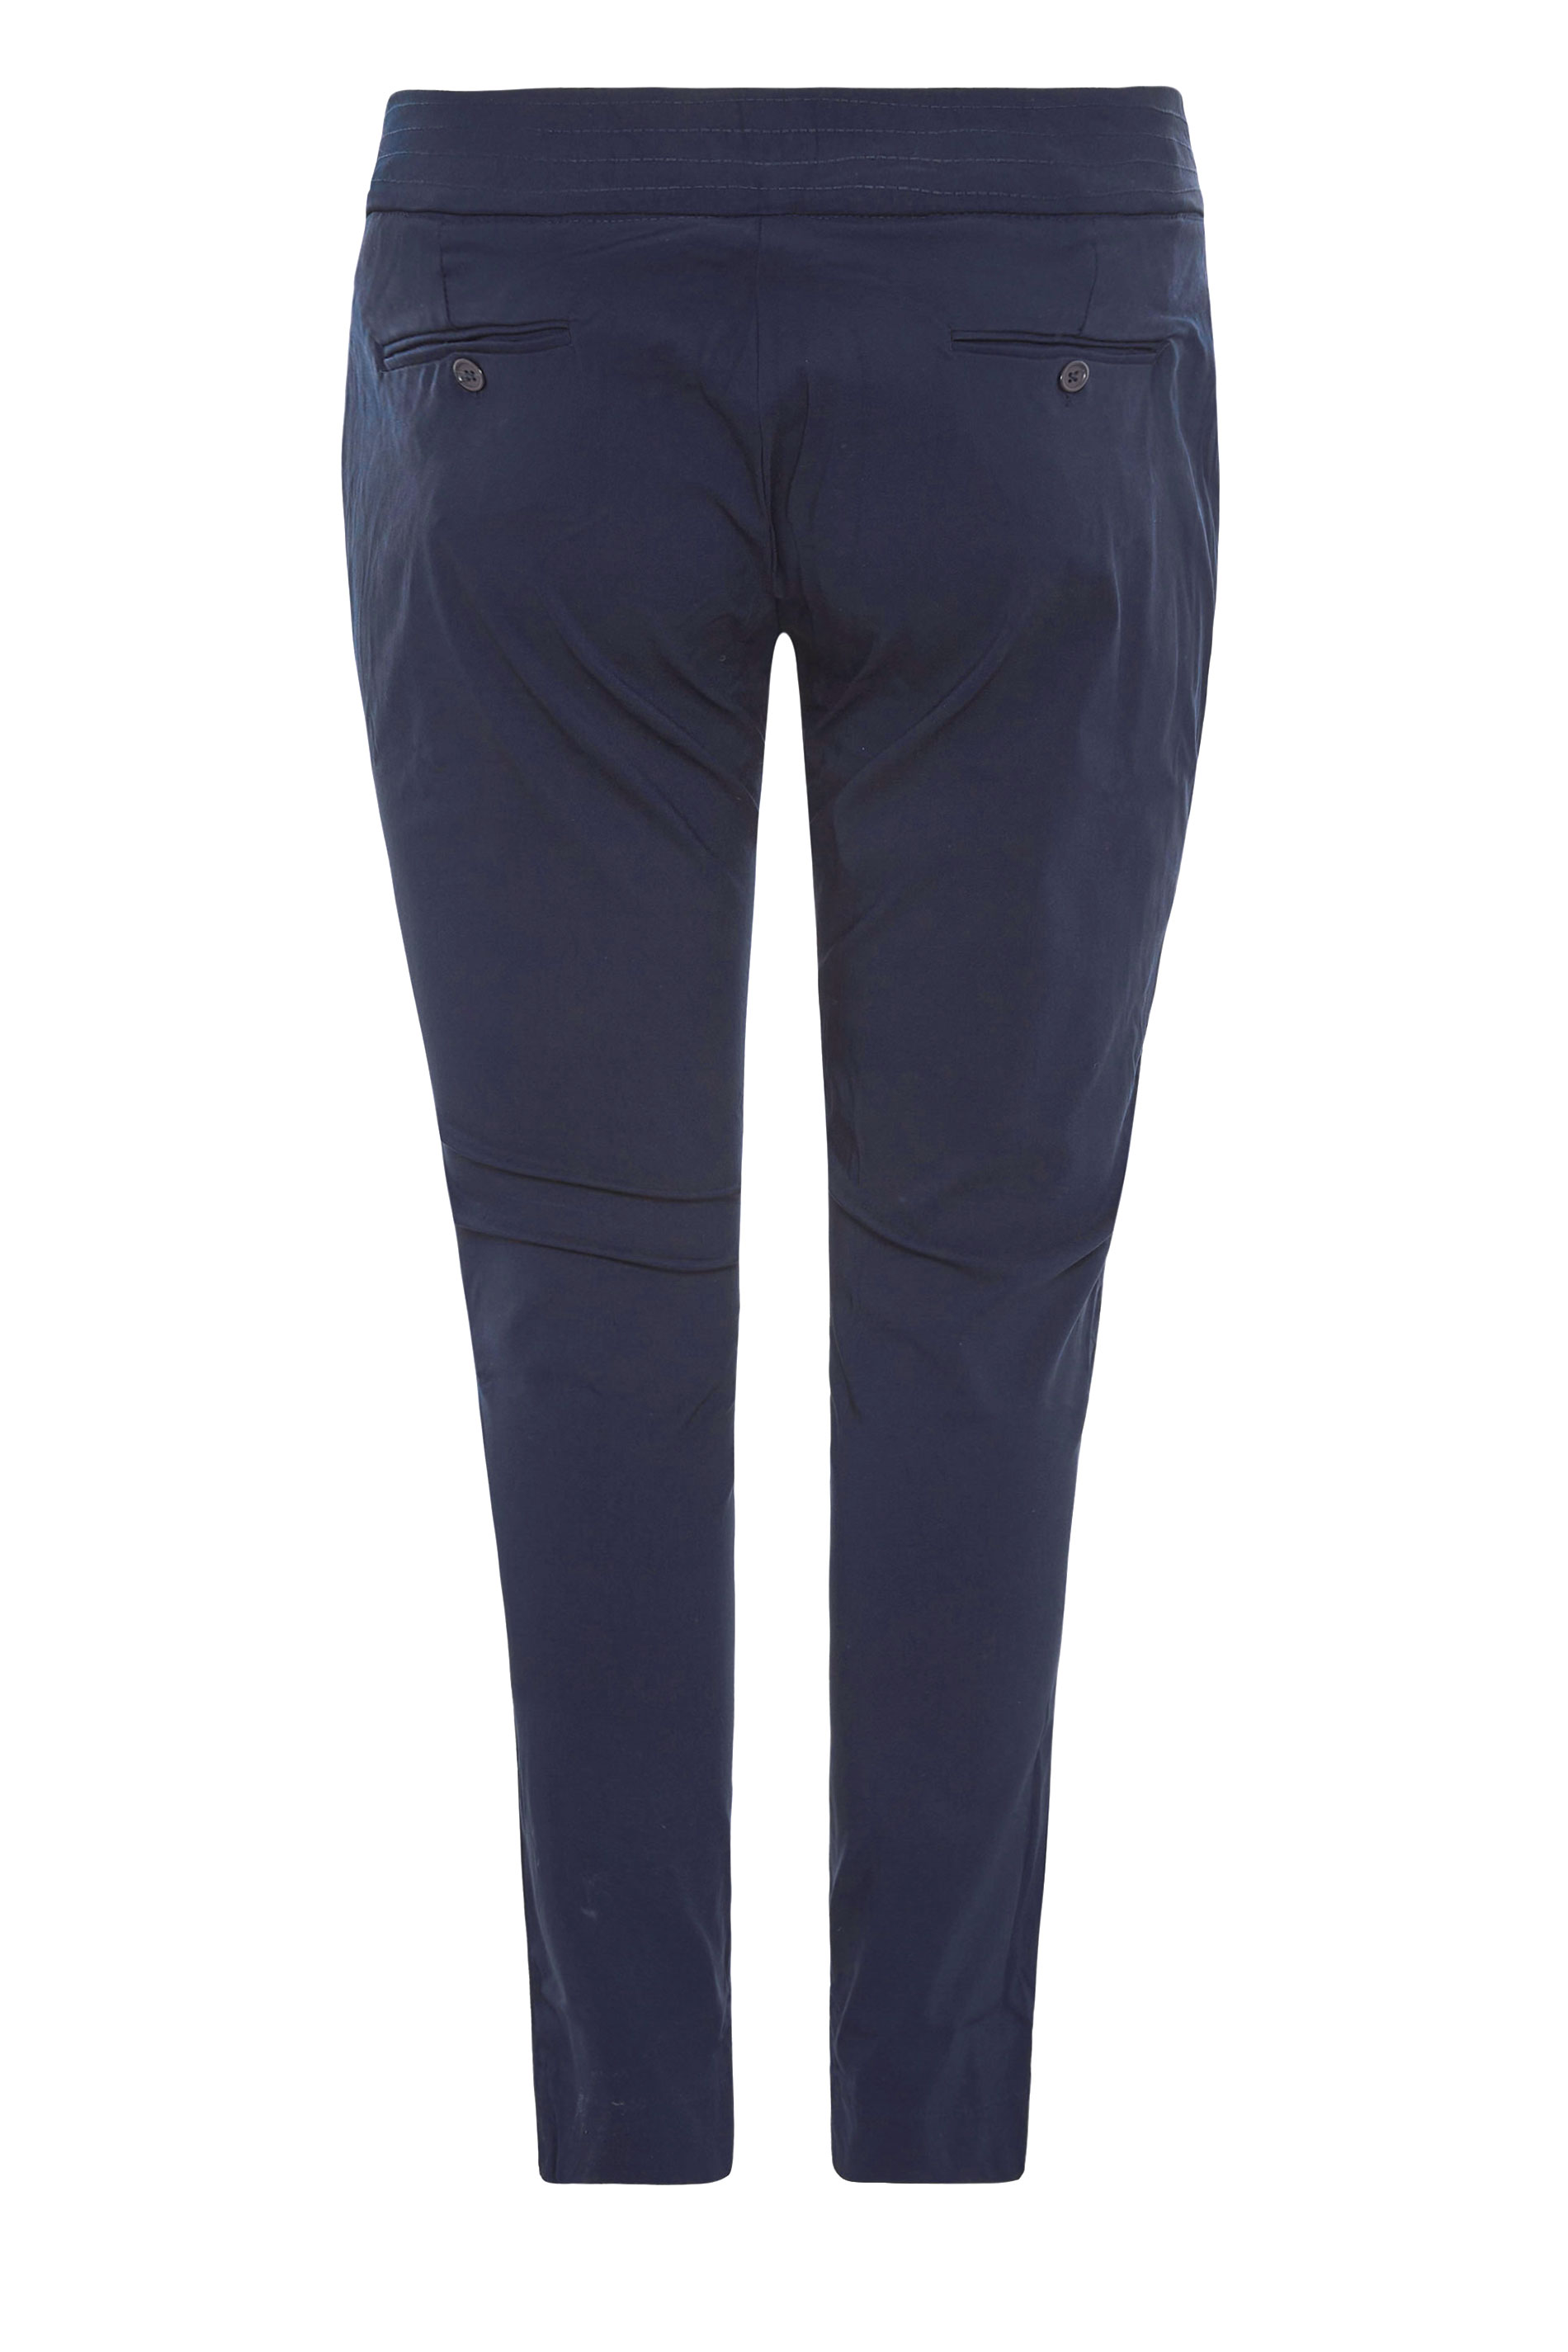 Navy Bengaline Stretch Trousers | Yours Clothing